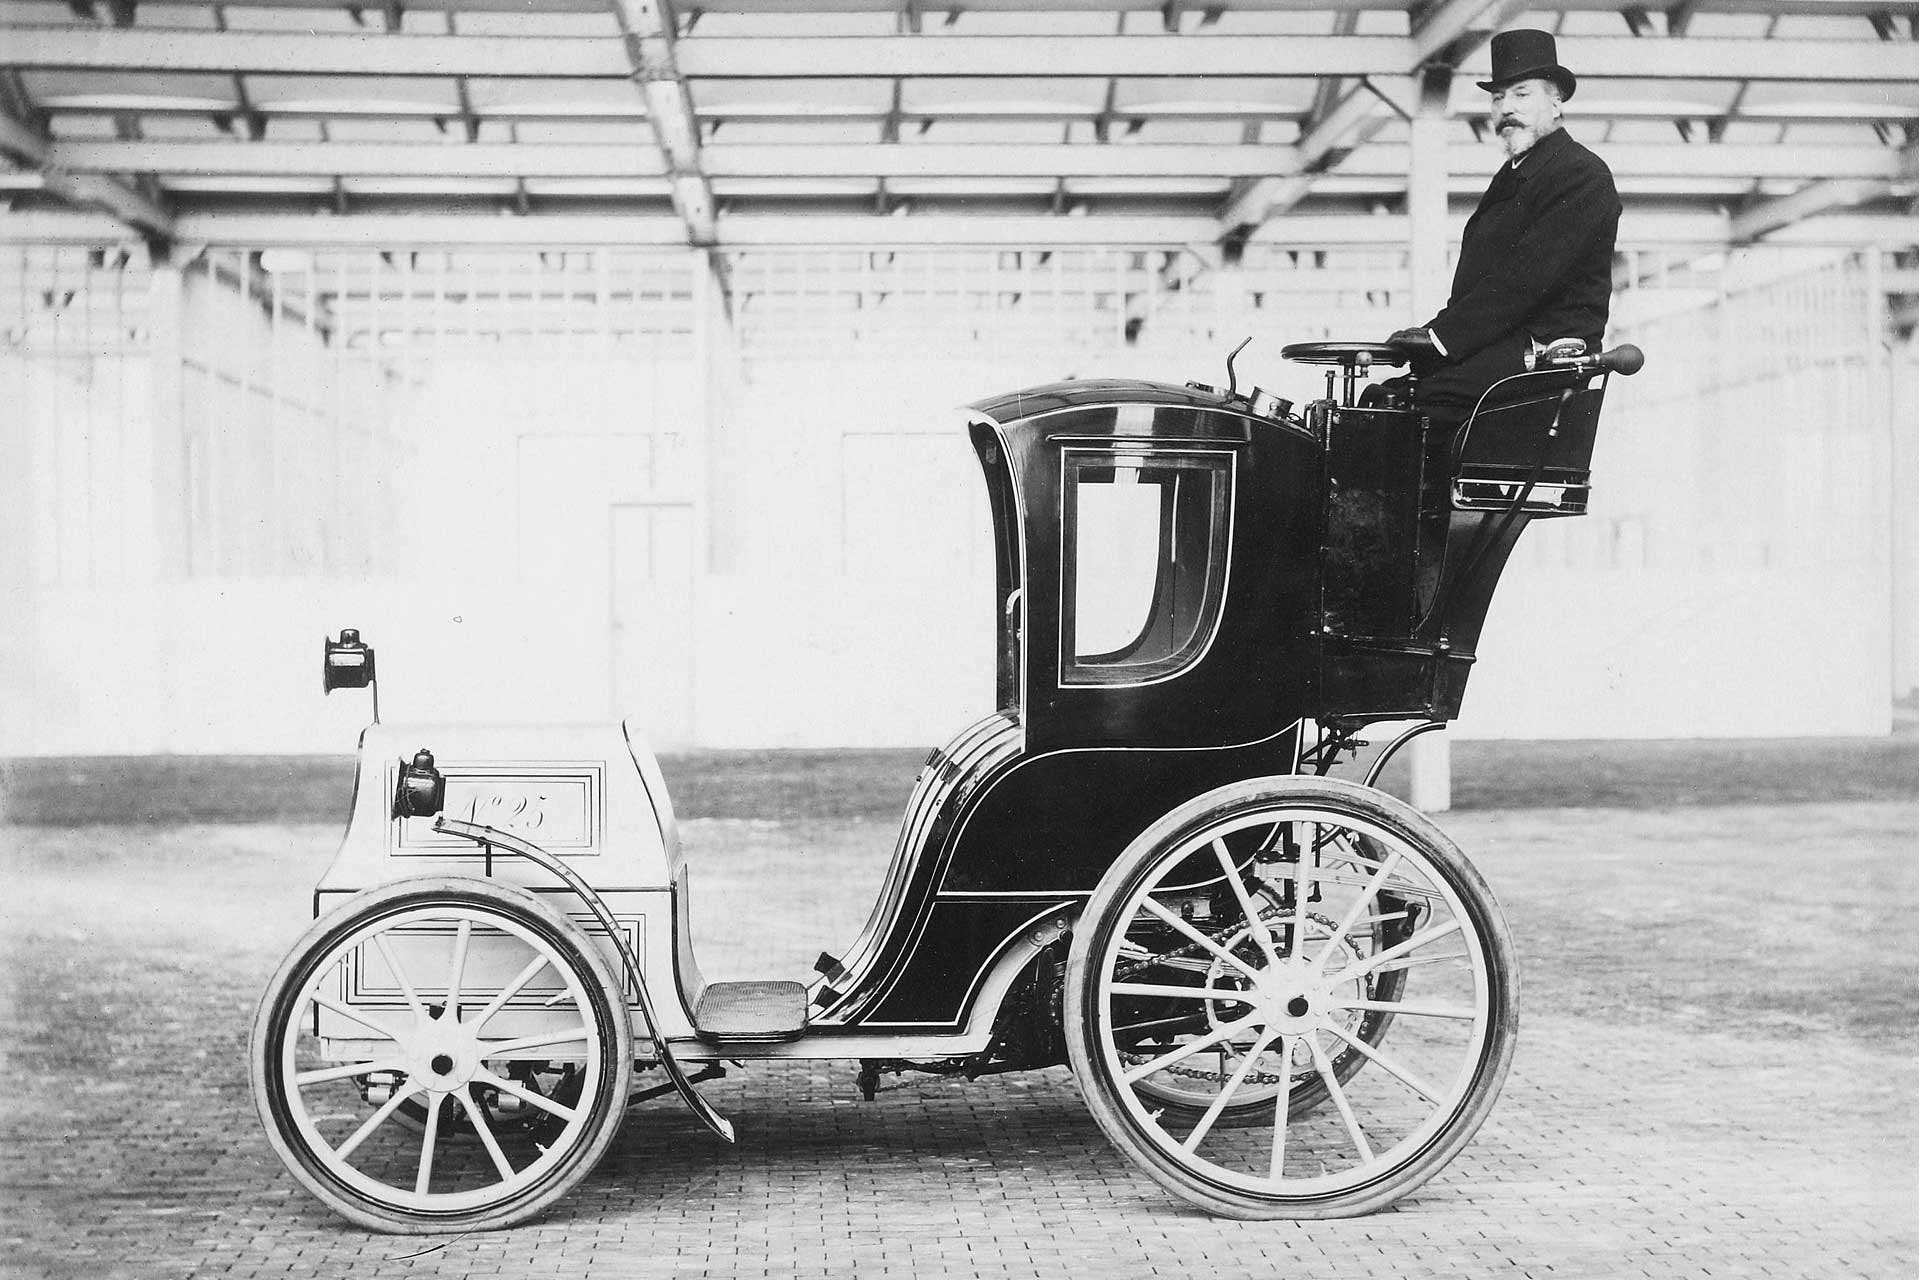 Electric Vehicles Have Been Around Since the 19th Century: Timeline